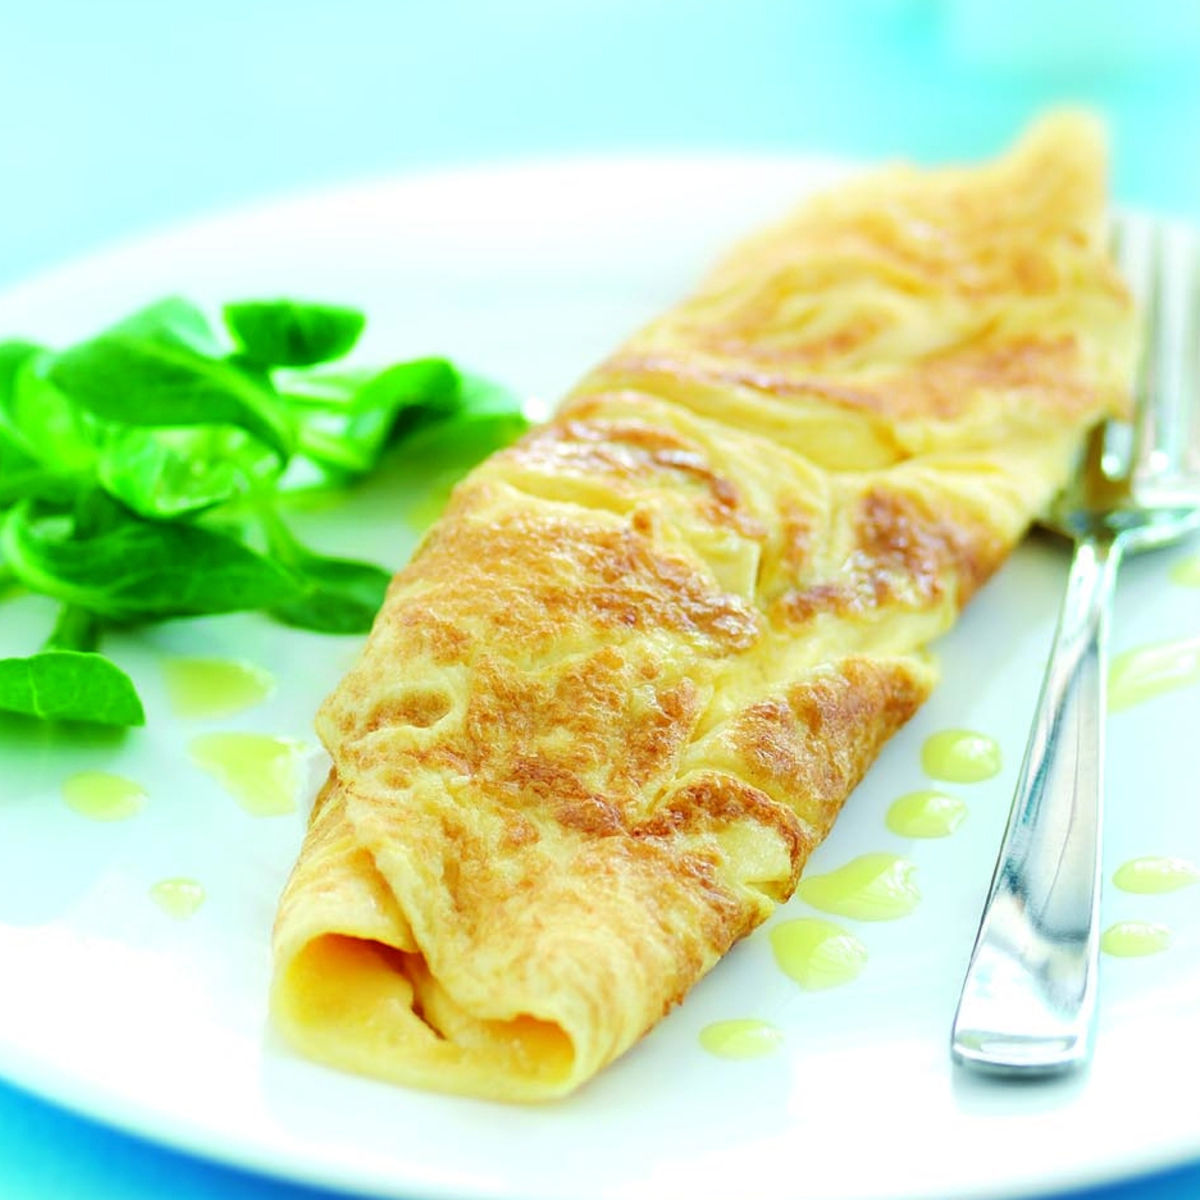 Microwave Omelet - Recipes